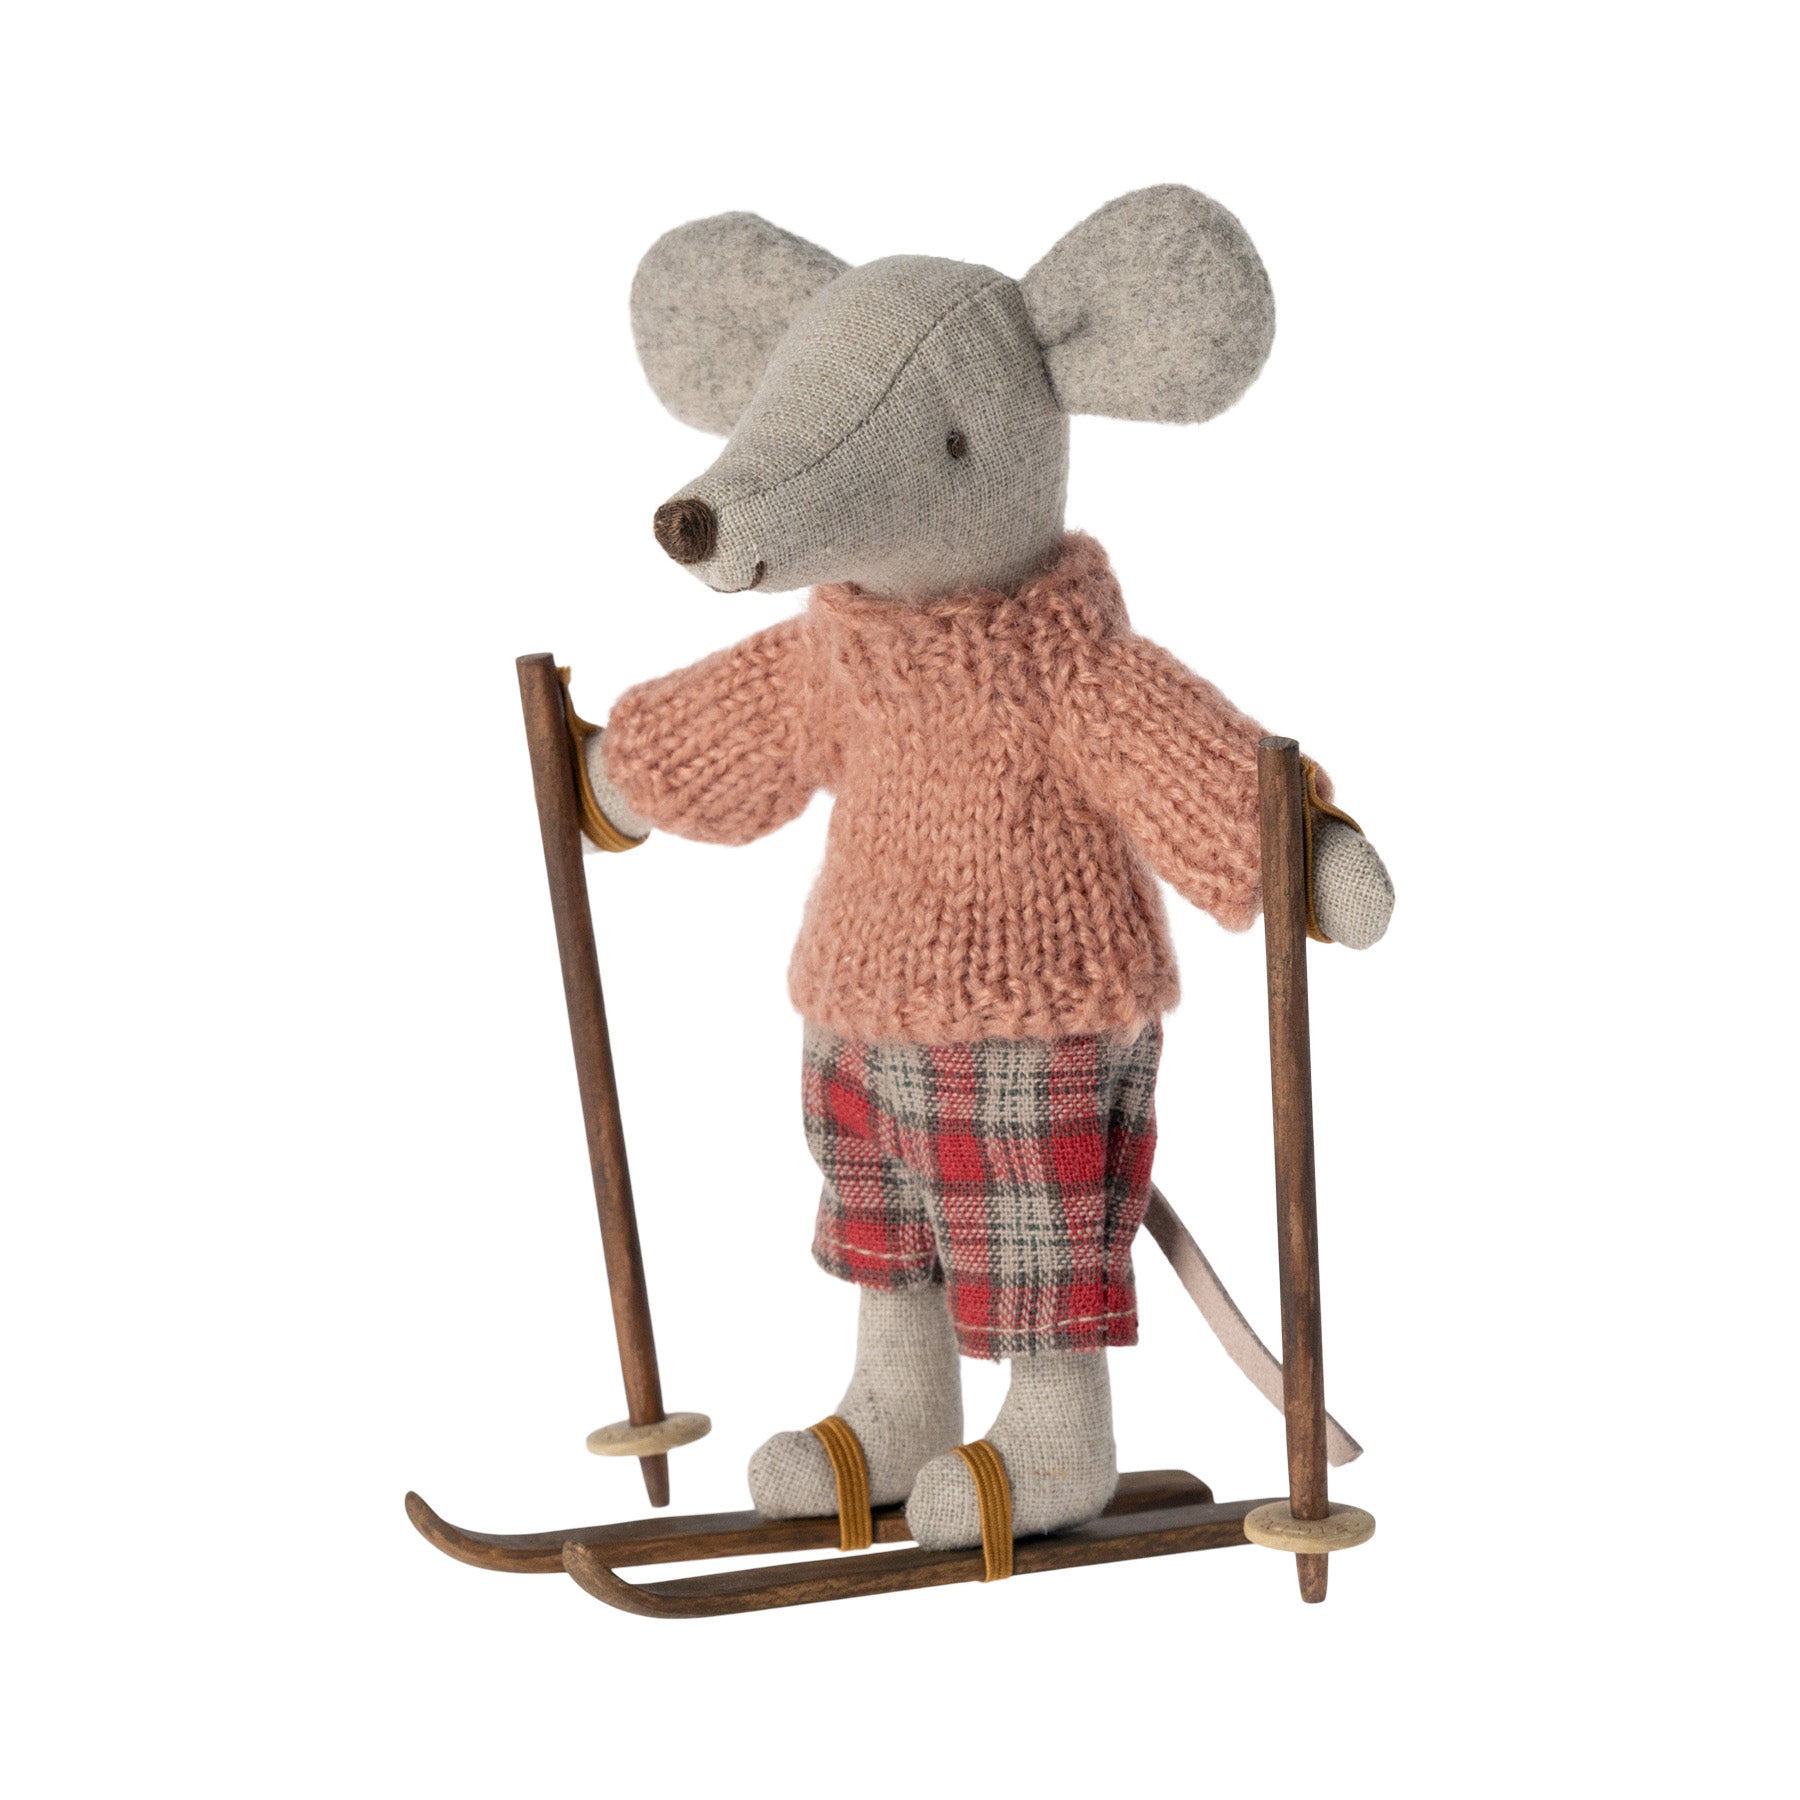 maileg big sister mouse dressed in a coral jumper, check trousers, standing on wooden skis, holding ski poles